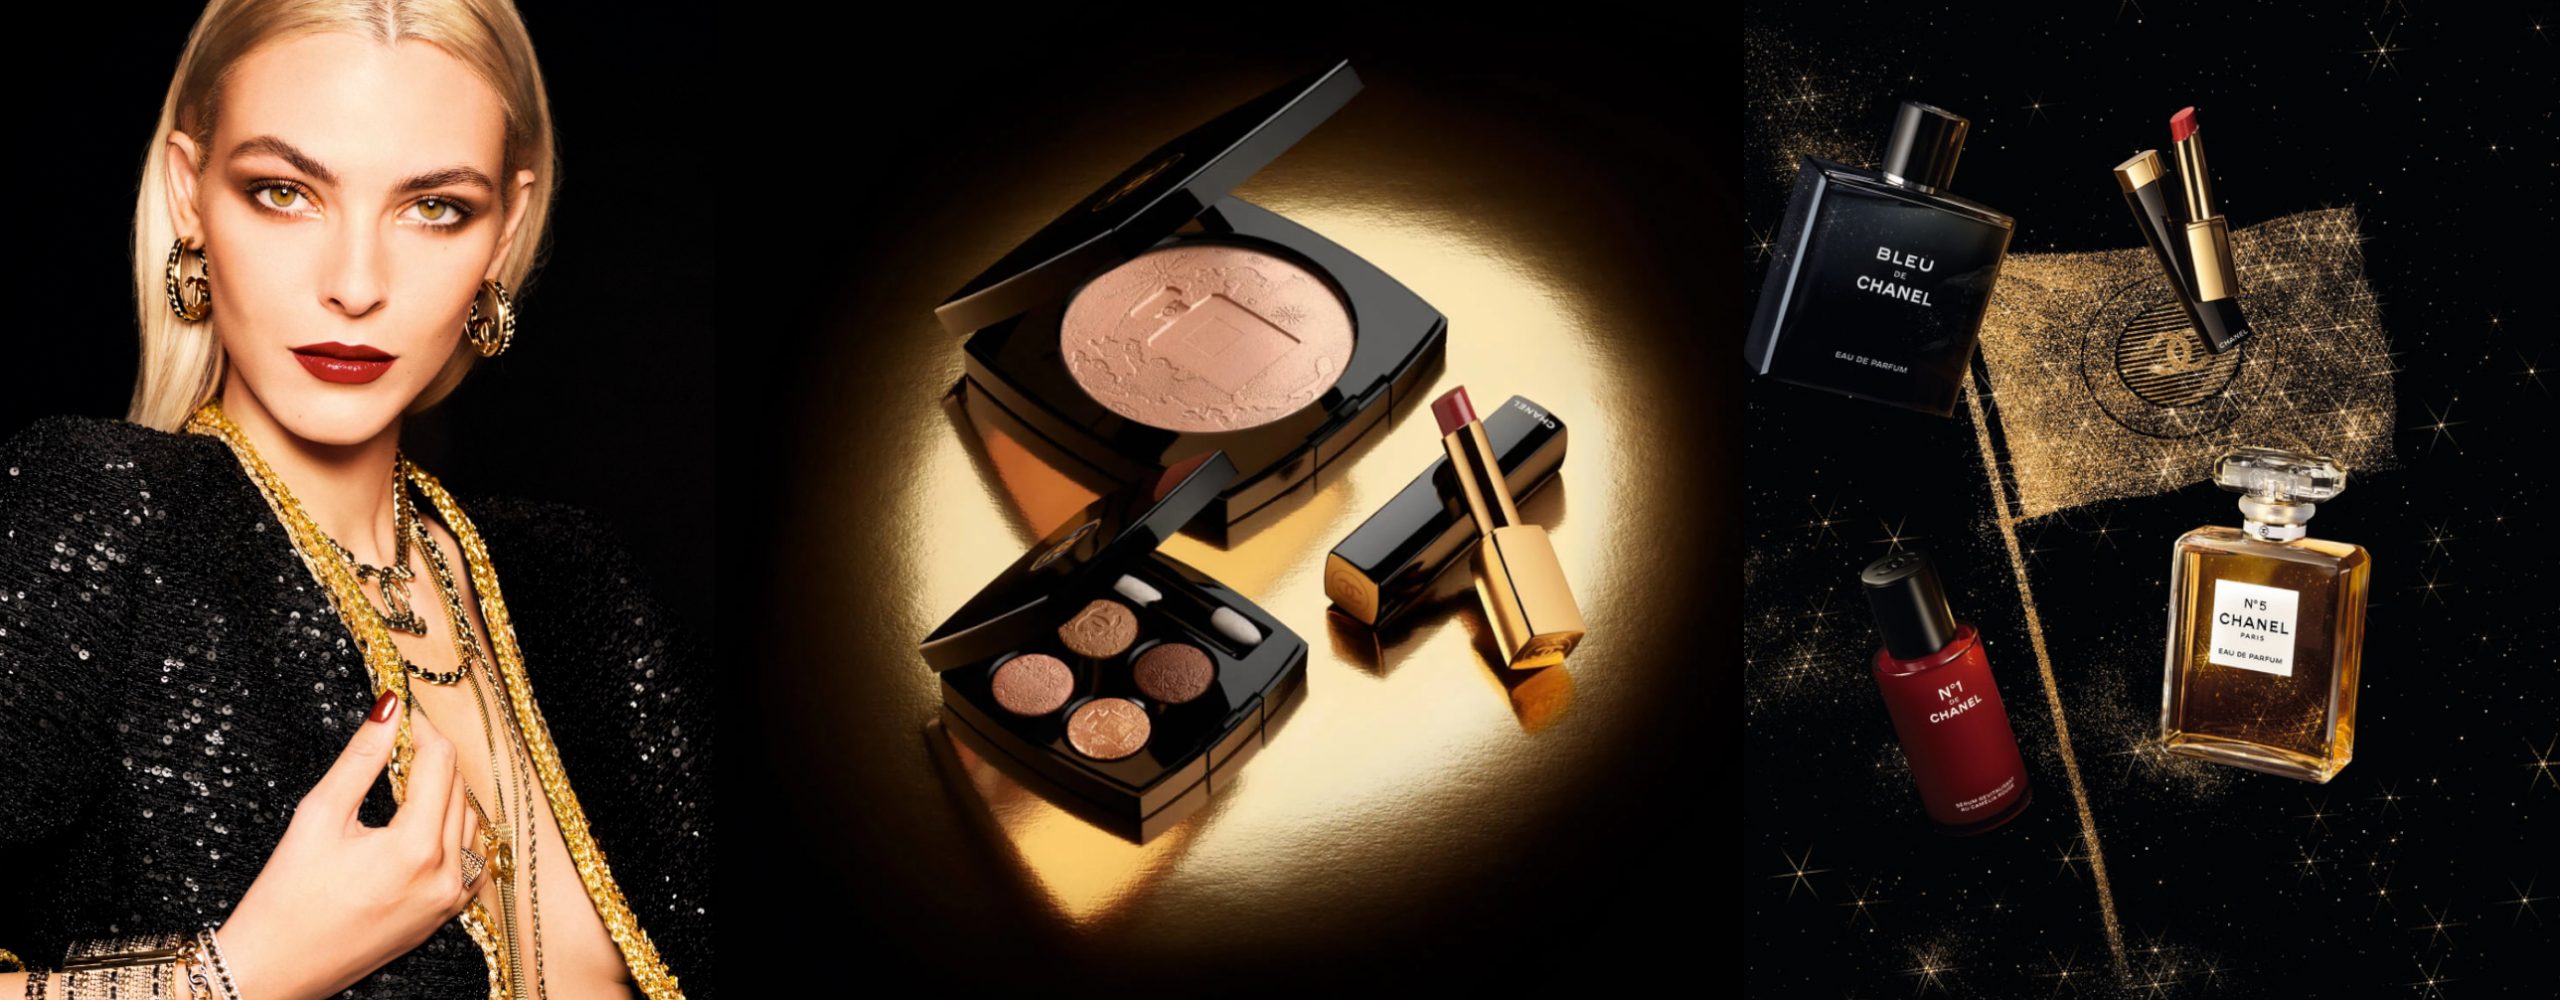 A Look At CHANEL Beauty's Lunar-Inspired Holiday Makeup Collection